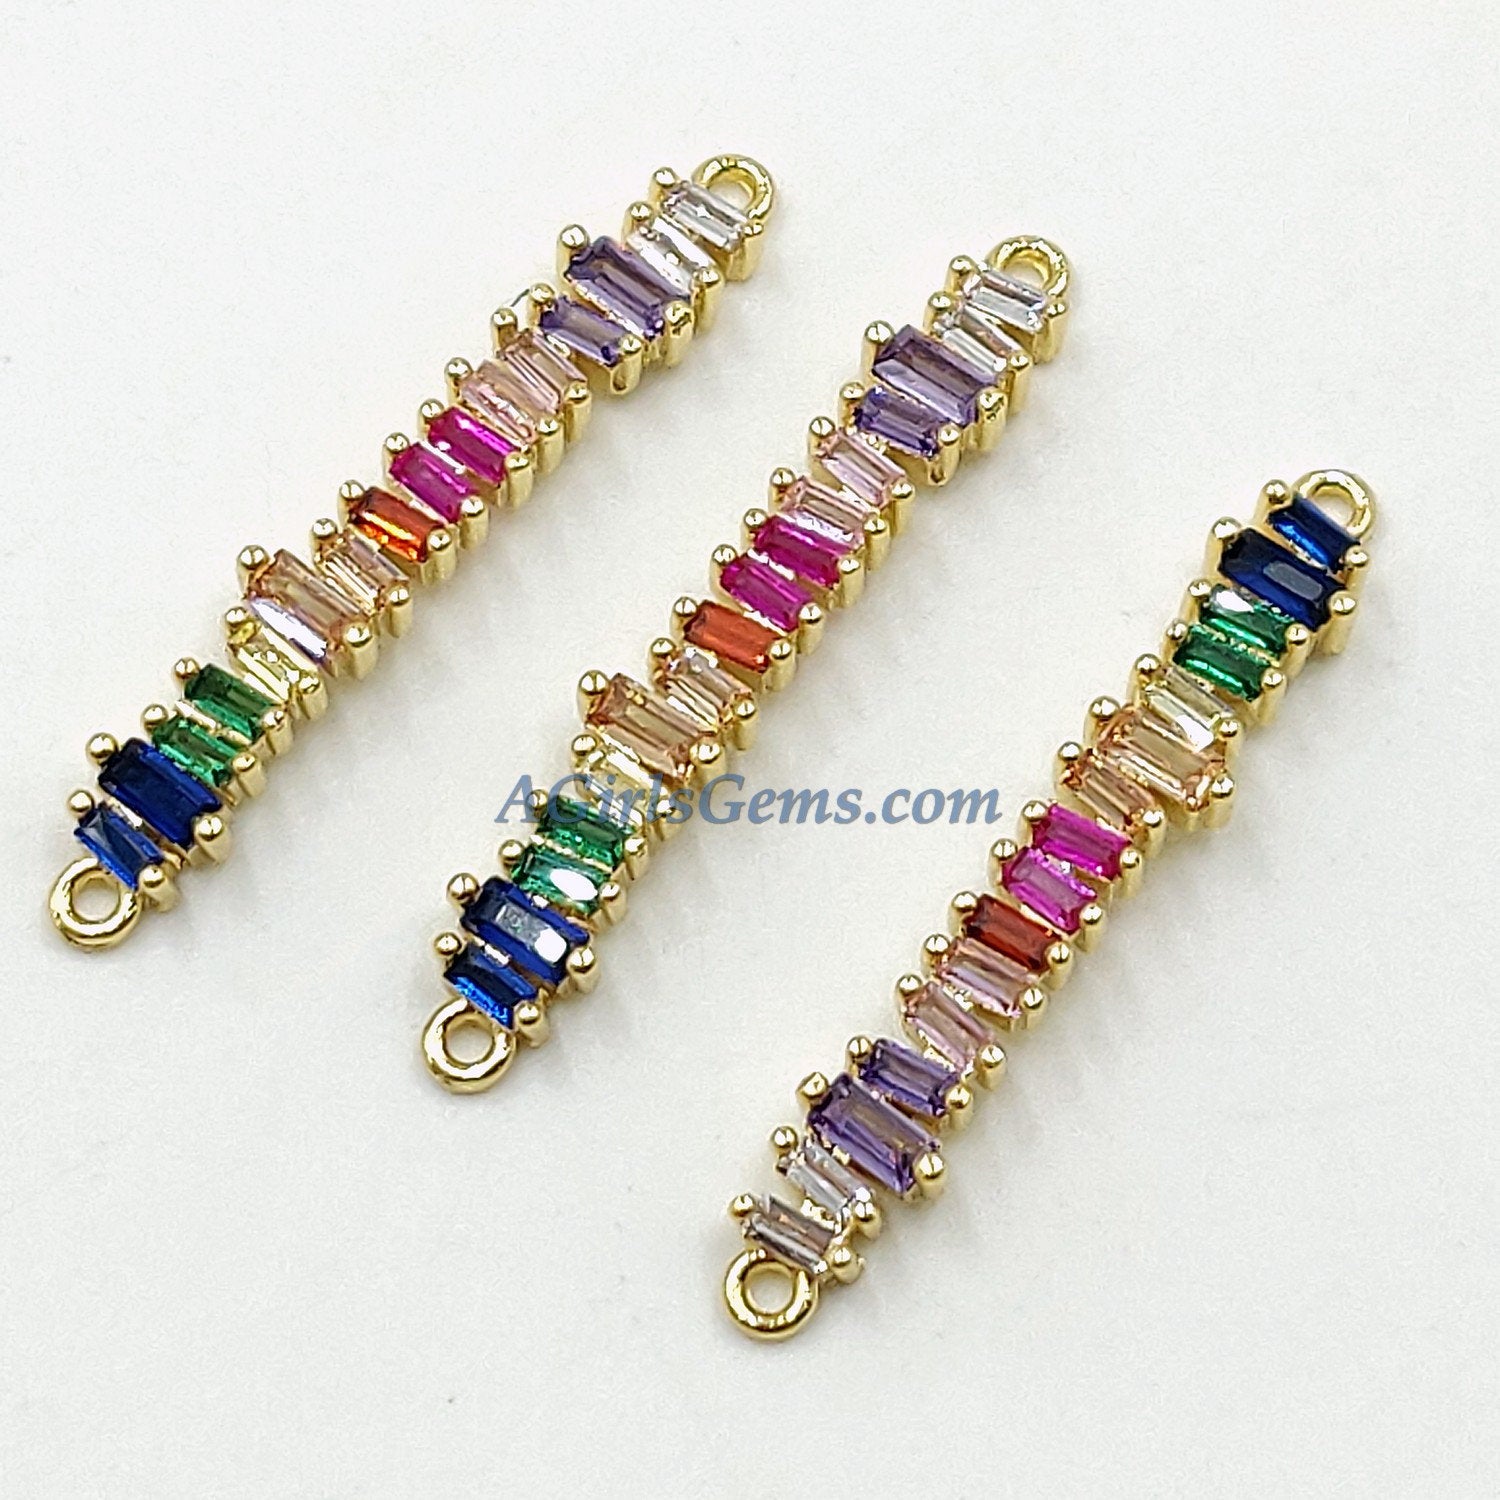 CZ Micro Pave Rainbow Disc Connector, Gold Multi Color Round Circle Charms, LGBT Pride 2 Double Loops Bracelet, Necklace Jewelry Supplies - A Girls Gems